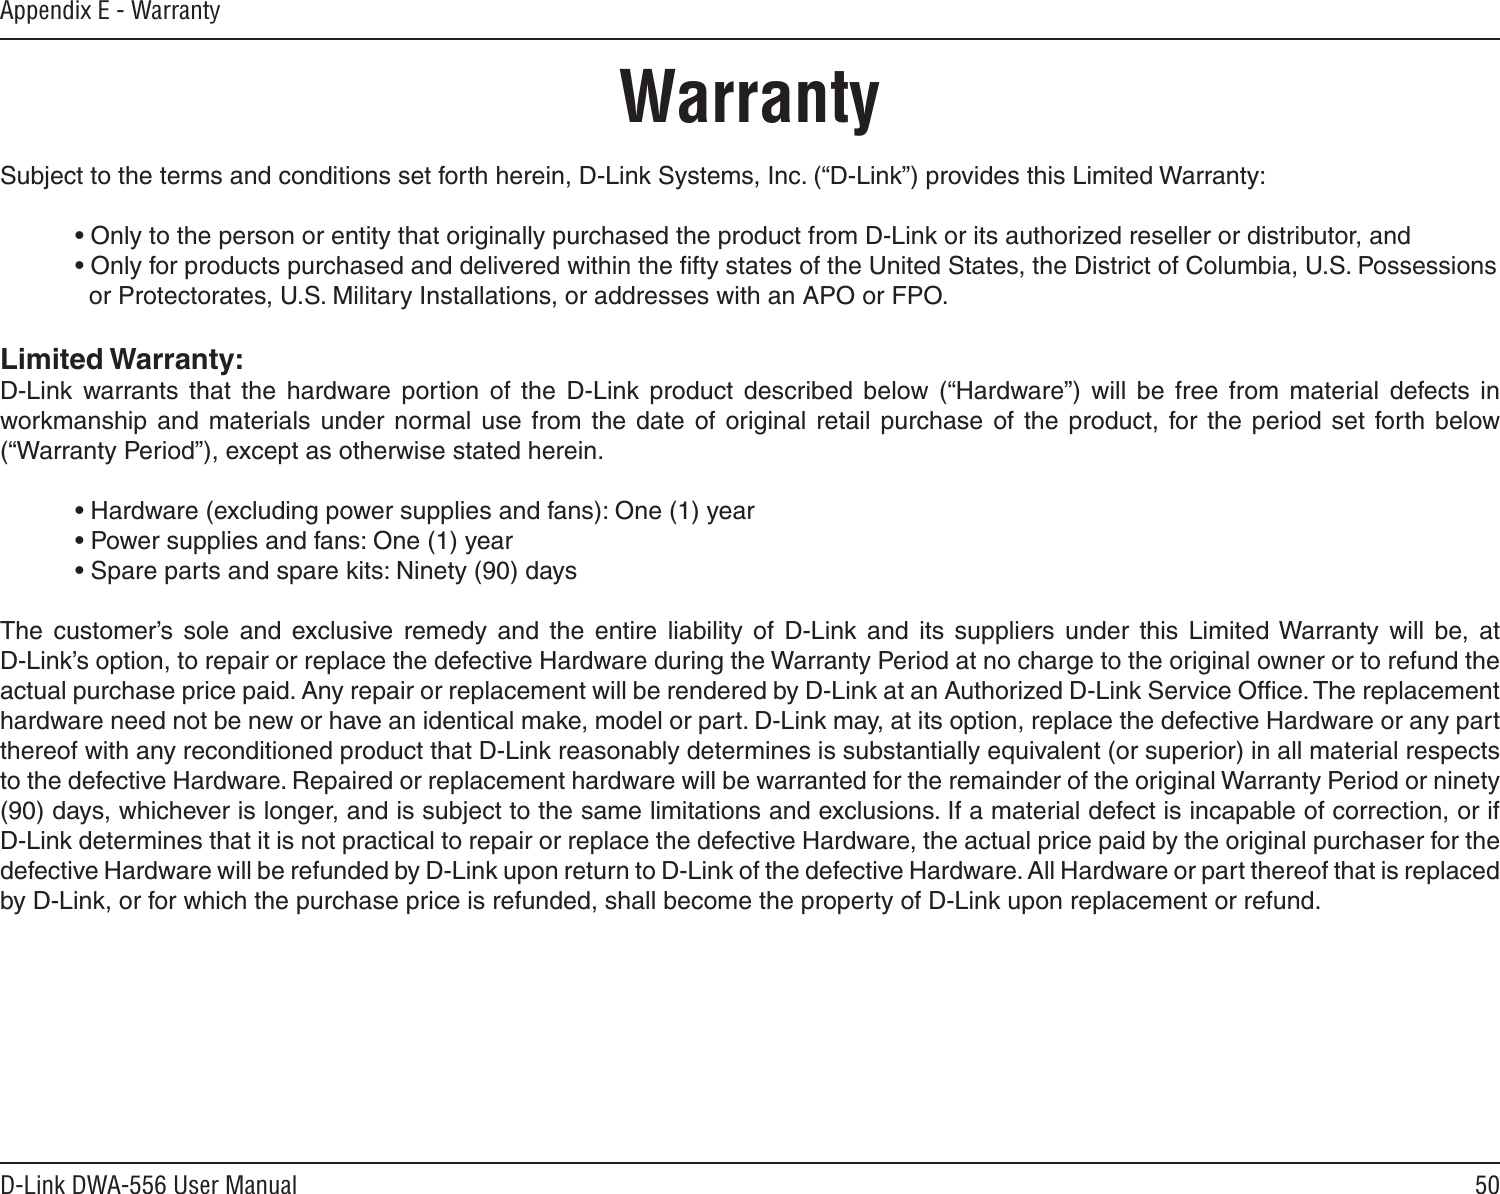 50D-Link DWA-556 User ManualAppendix E - WarrantyWarrantySubject to the terms and conditions set forth herein, D-Link Systems, Inc. (“D-Link”) provides this Limited Warranty:  • Only to the person or entity that originally purchased the product from D-Link or its authorized reseller or distributor, and  • Only for products purchased and delivered within the ﬁfty states of the United States, the District of Columbia, U.S. Possessions      or Protectorates, U.S. Military Installations, or addresses with an APO or FPO.Limited Warranty:D-Link  warrants that  the  hardware  portion  of  the  D-Link  product  described  below  (“Hardware”)  will  be  free  from  material  defects  in workmanship  and  materials  under  normal  use  from  the  date of  original  retail purchase  of  the  product,  for  the  period set  forth below (“Warranty Period”), except as otherwise stated herein.  • Hardware (excluding power supplies and fans): One (1) year  • Power supplies and fans: One (1) year  • Spare parts and spare kits: Ninety (90) daysThe  customer’s  sole  and  exclusive  remedy  and  the  entire  liability  of  D-Link  and  its  suppliers  under  this  Limited Warranty  will  be,  at  D-Link’s option, to repair or replace the defective Hardware during the Warranty Period at no charge to the original owner or to refund the actual purchase price paid. Any repair or replacement will be rendered by D-Link at an Authorized D-Link Service Ofﬁce. The replacement hardware need not be new or have an identical make, model or part. D-Link may, at its option, replace the defective Hardware or any part thereof with any reconditioned product that D-Link reasonably determines is substantially equivalent (or superior) in all material respects to the defective Hardware. Repaired or replacement hardware will be warranted for the remainder of the original Warranty Period or ninety (90) days, whichever is longer, and is subject to the same limitations and exclusions. If a material defect is incapable of correction, or if D-Link determines that it is not practical to repair or replace the defective Hardware, the actual price paid by the original purchaser for the defective Hardware will be refunded by D-Link upon return to D-Link of the defective Hardware. All Hardware or part thereof that is replaced by D-Link, or for which the purchase price is refunded, shall become the property of D-Link upon replacement or refund.